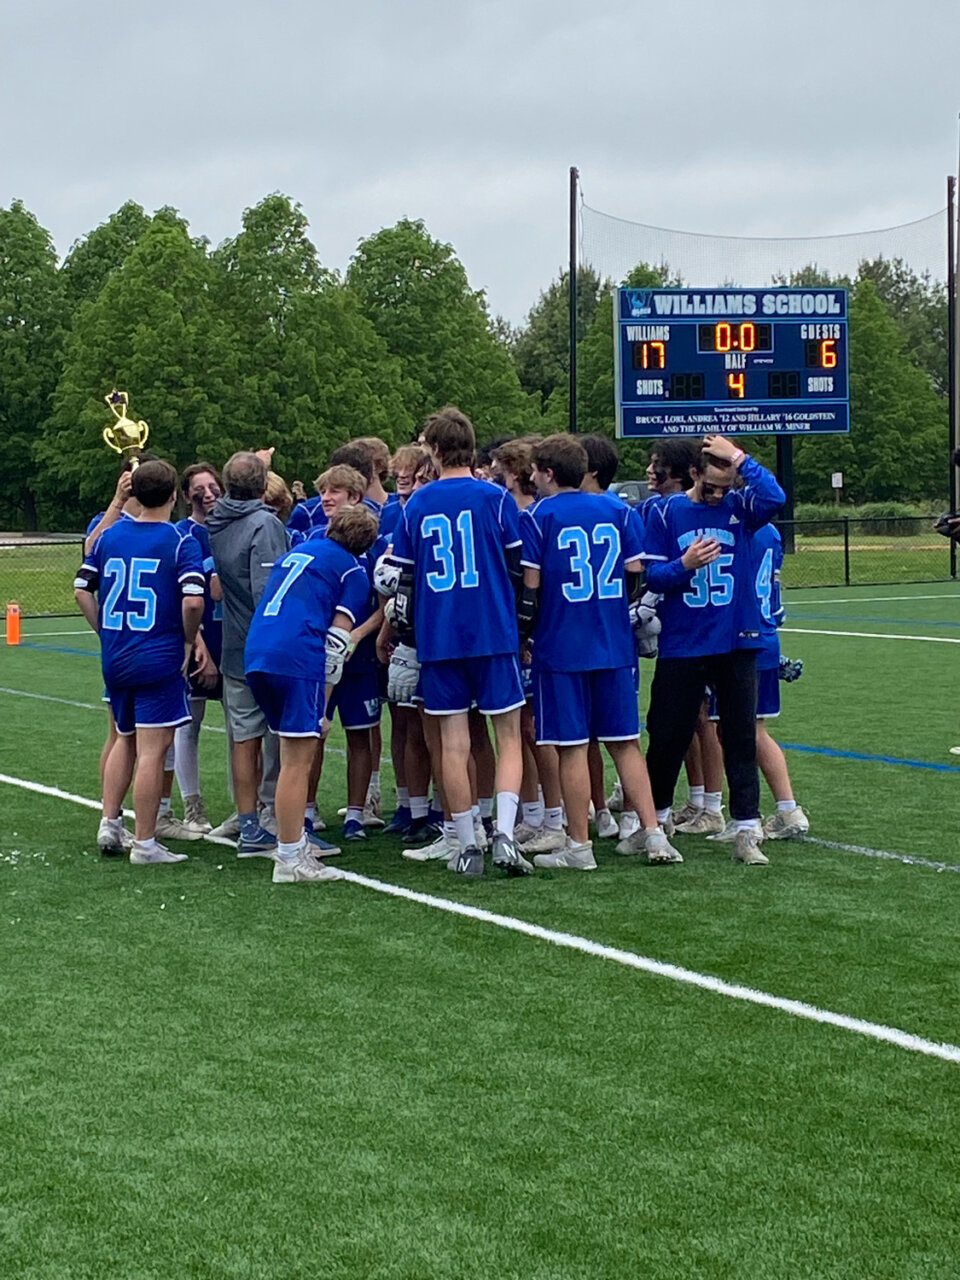 Williams School boys varsity lacrosse HVAL championship game players huddle around celebrating with a trophy